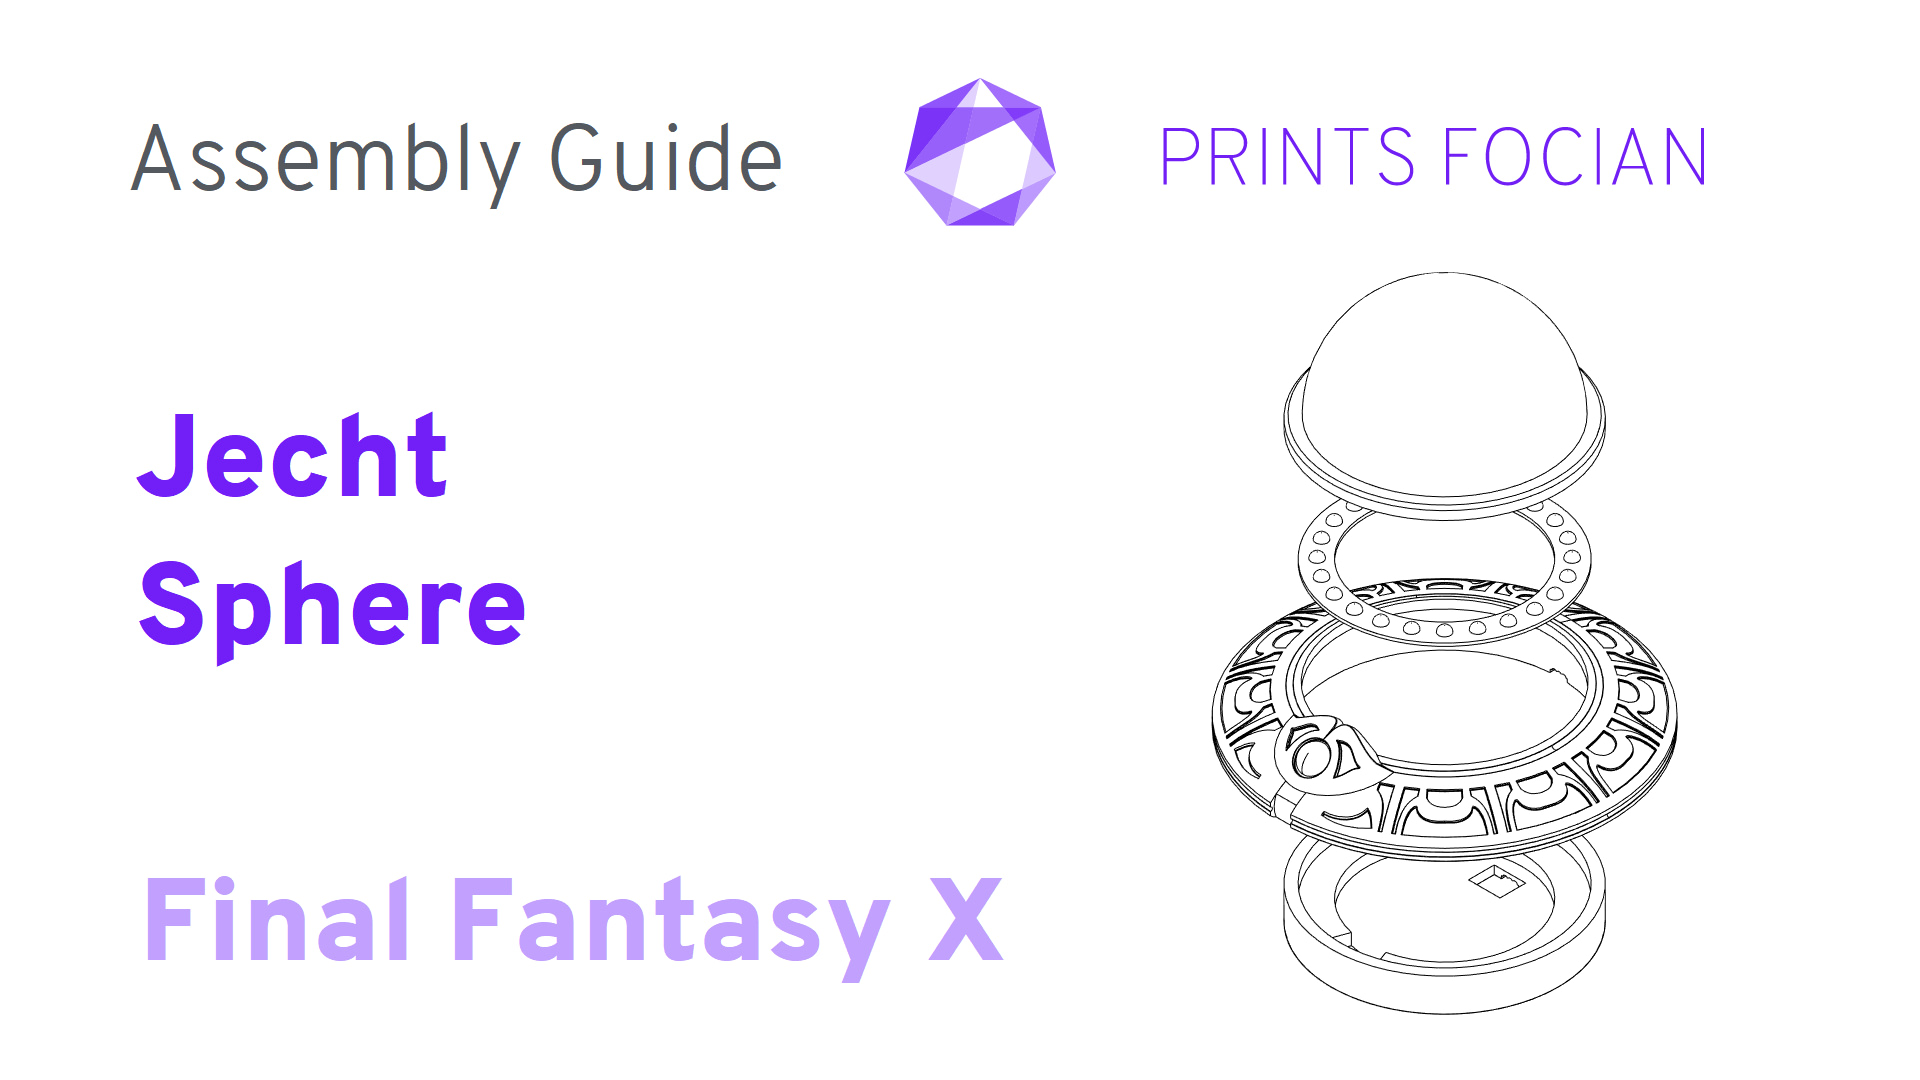 Text: Prints Focian, Assembly Guide, Jecht Sphere. Final Fantasy X. Image of exploded view of Final Fantasy X Jecht Sphere.